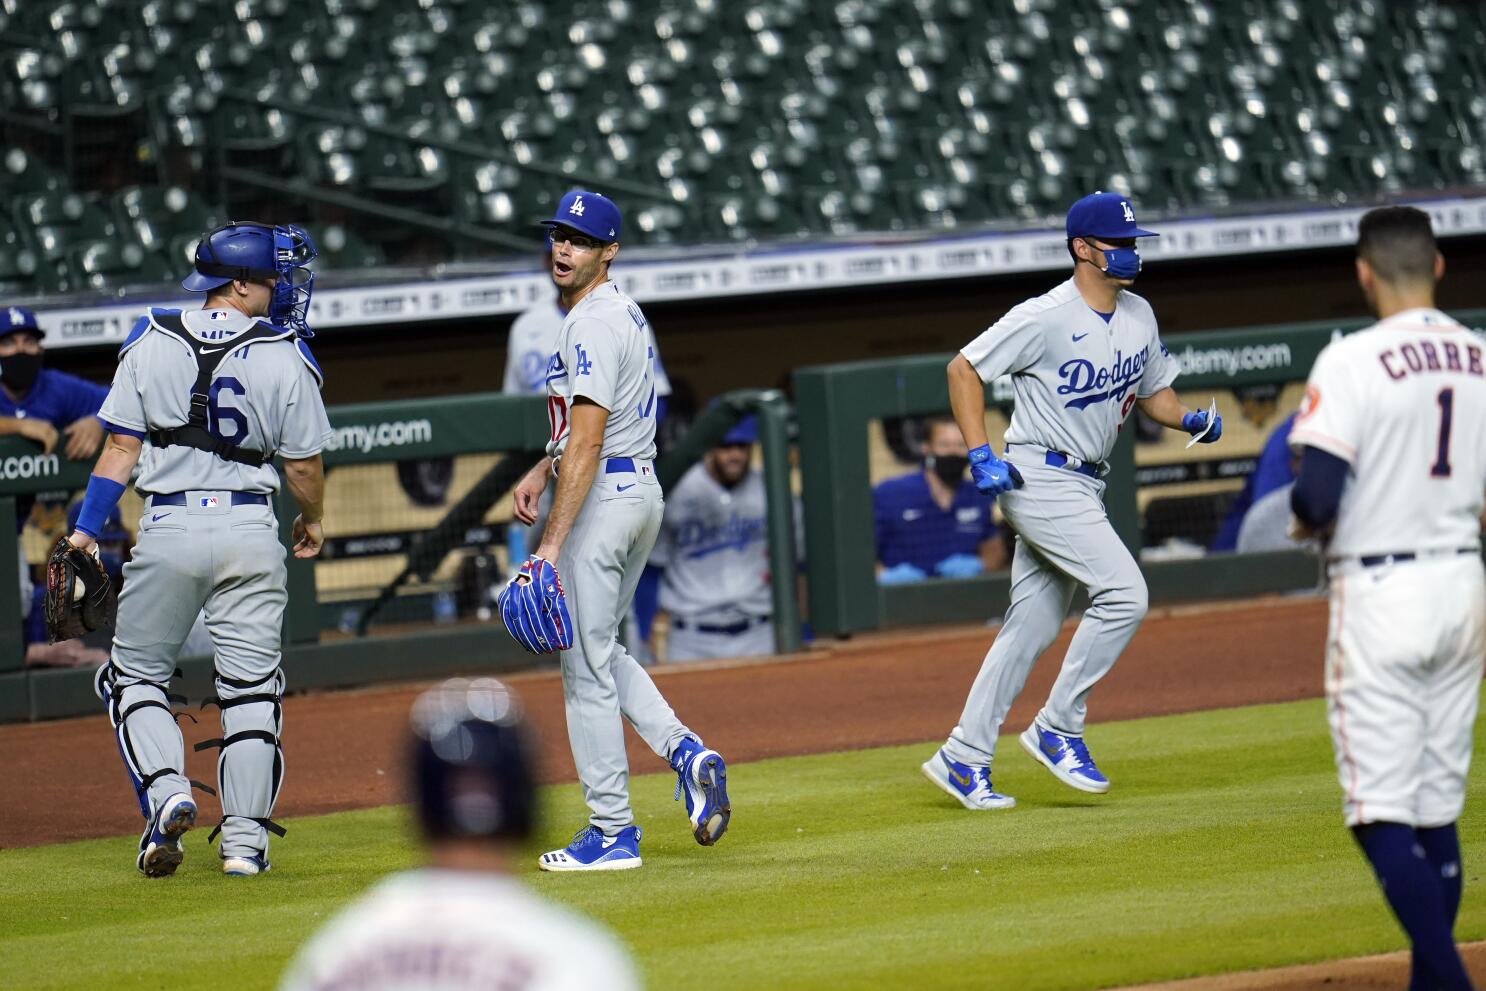 Five observations about the Dodgers as they start the second half